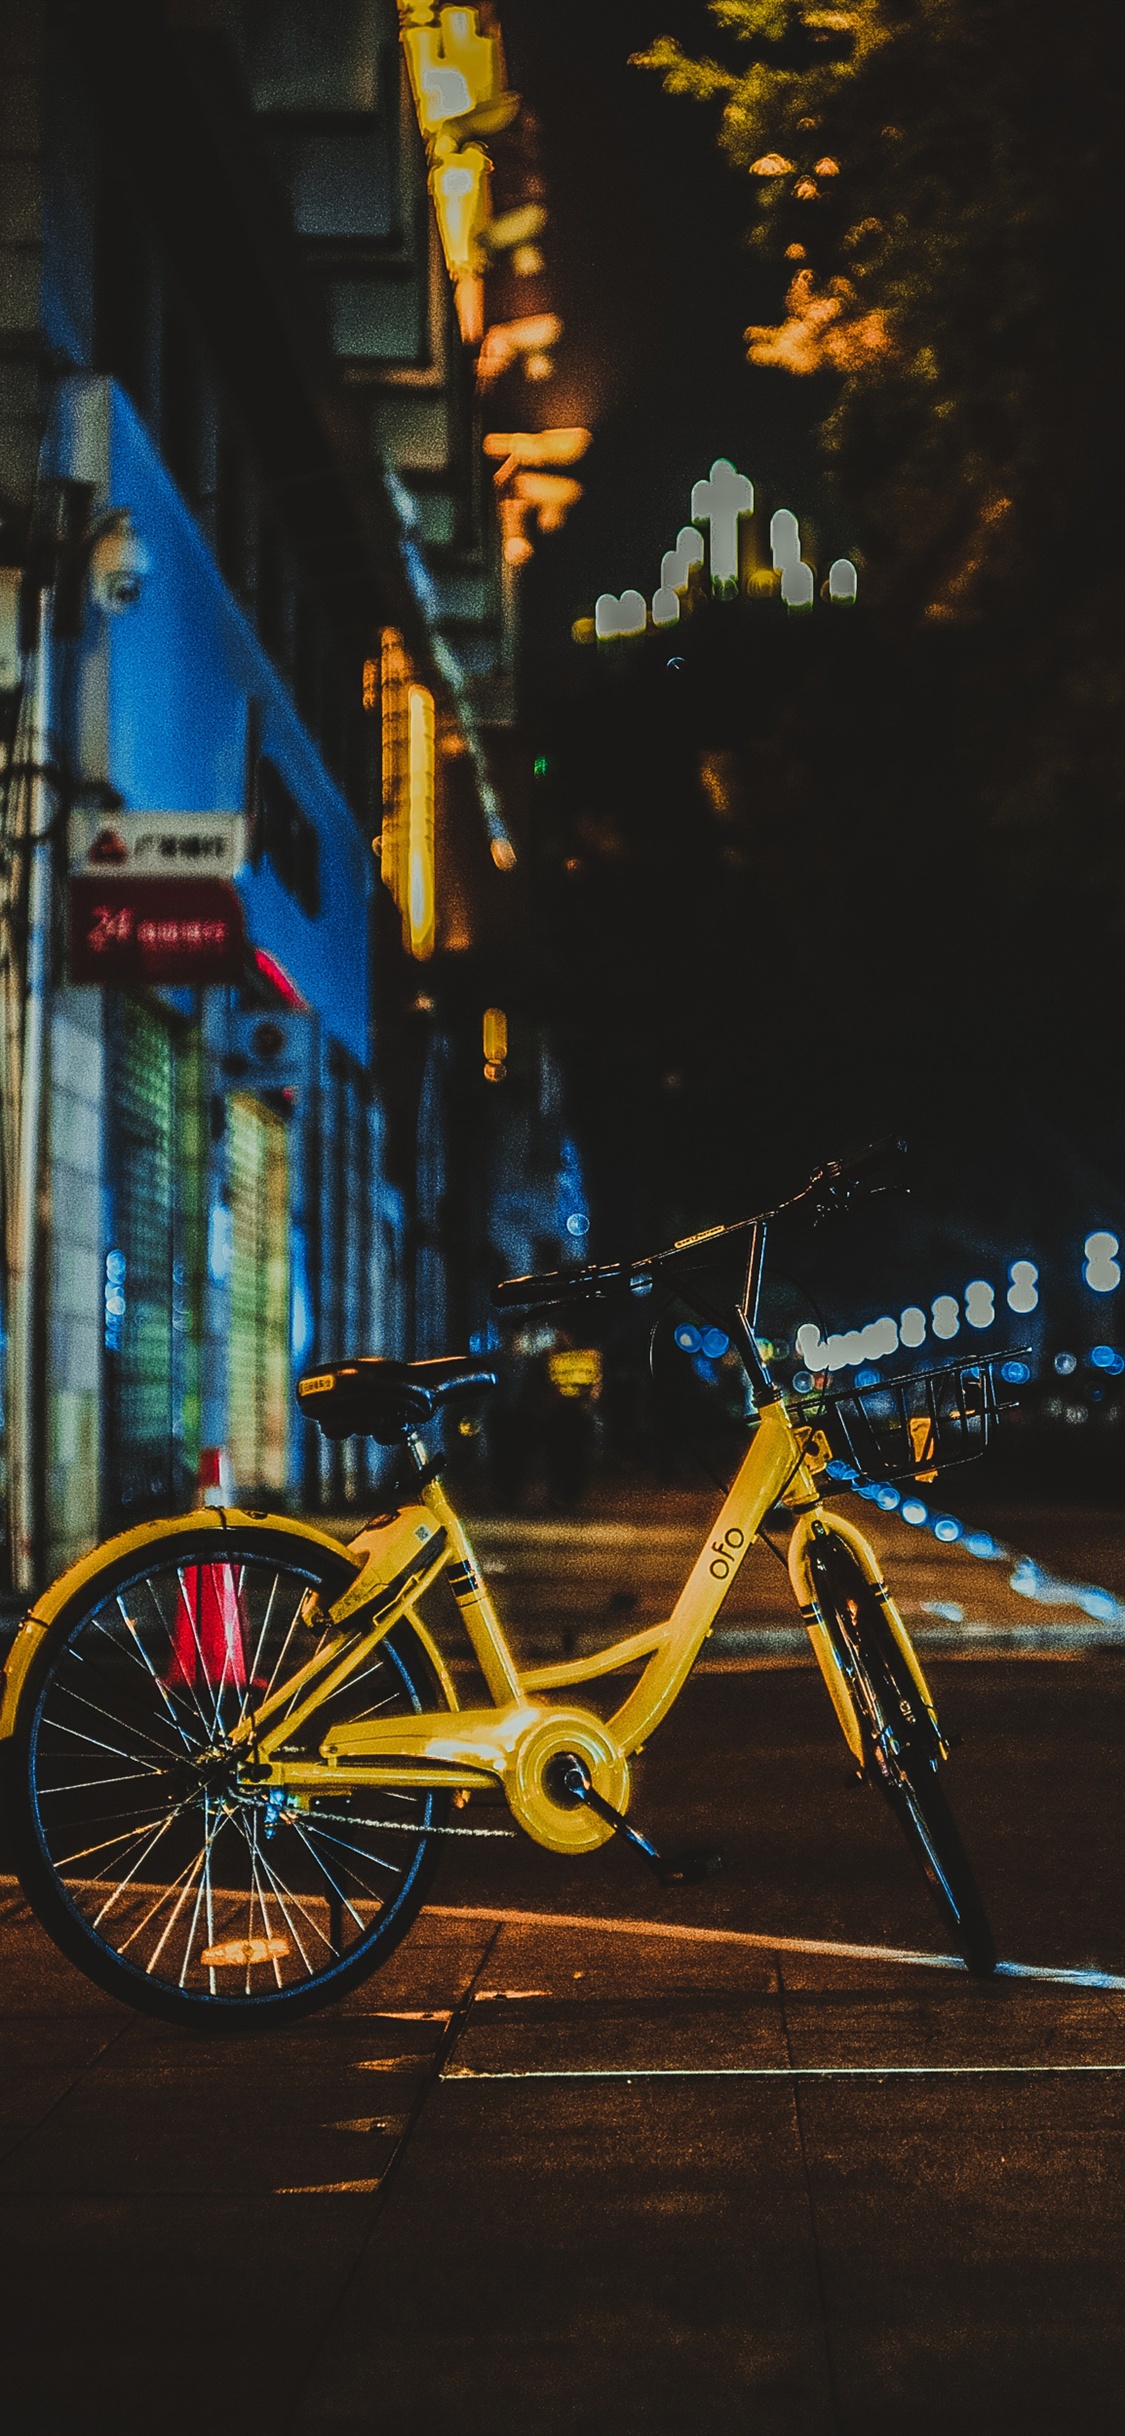 Iphone X Bikes Images Wallpapers